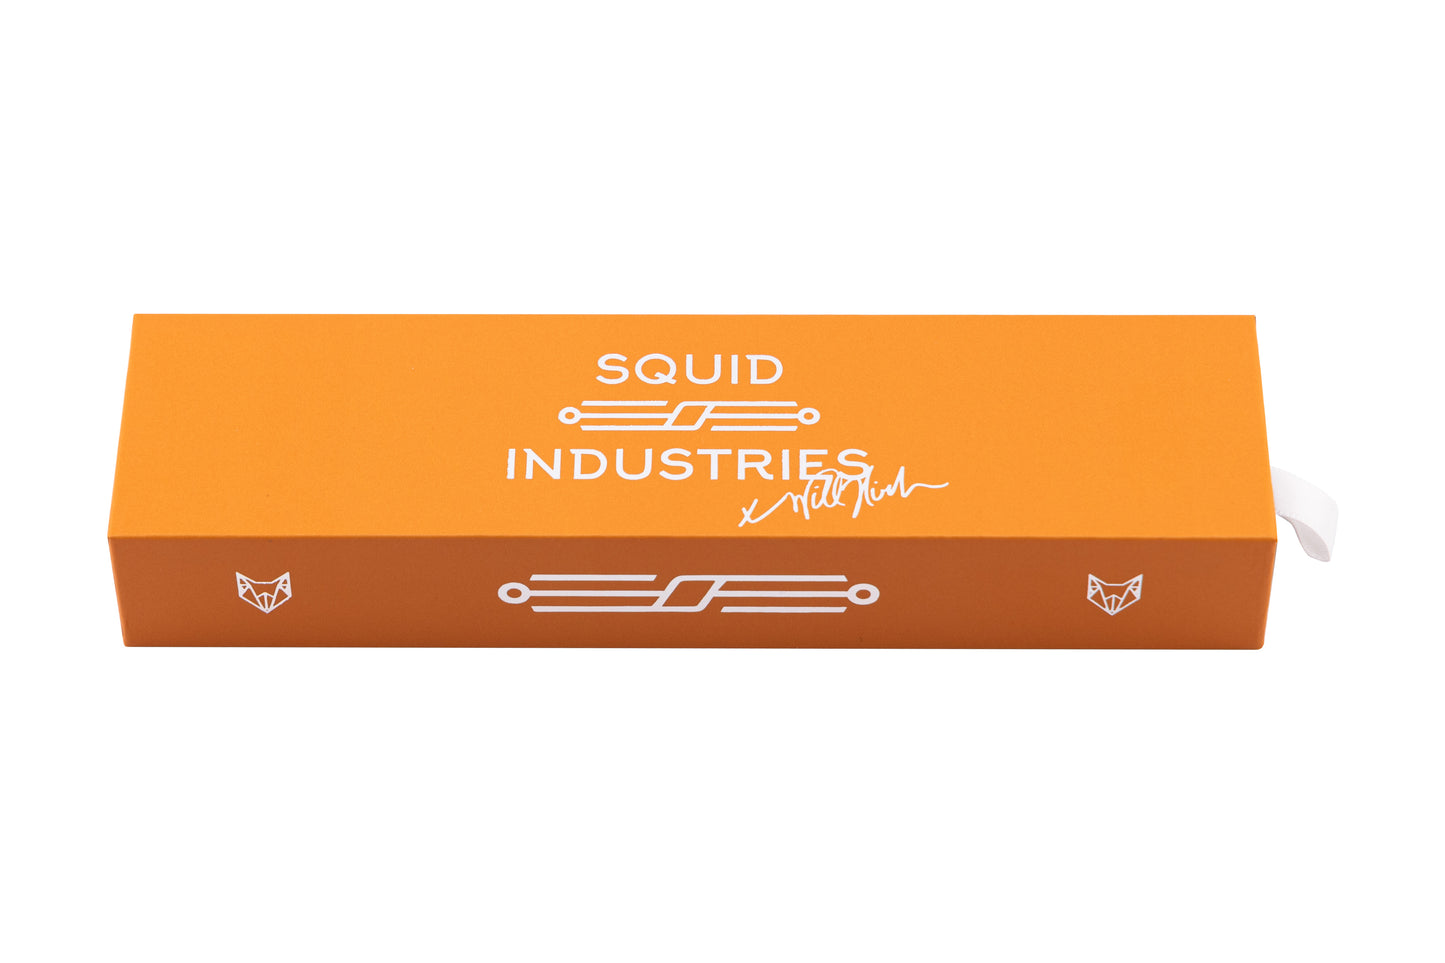 Squiddy-WH signature will hirsch orange product box